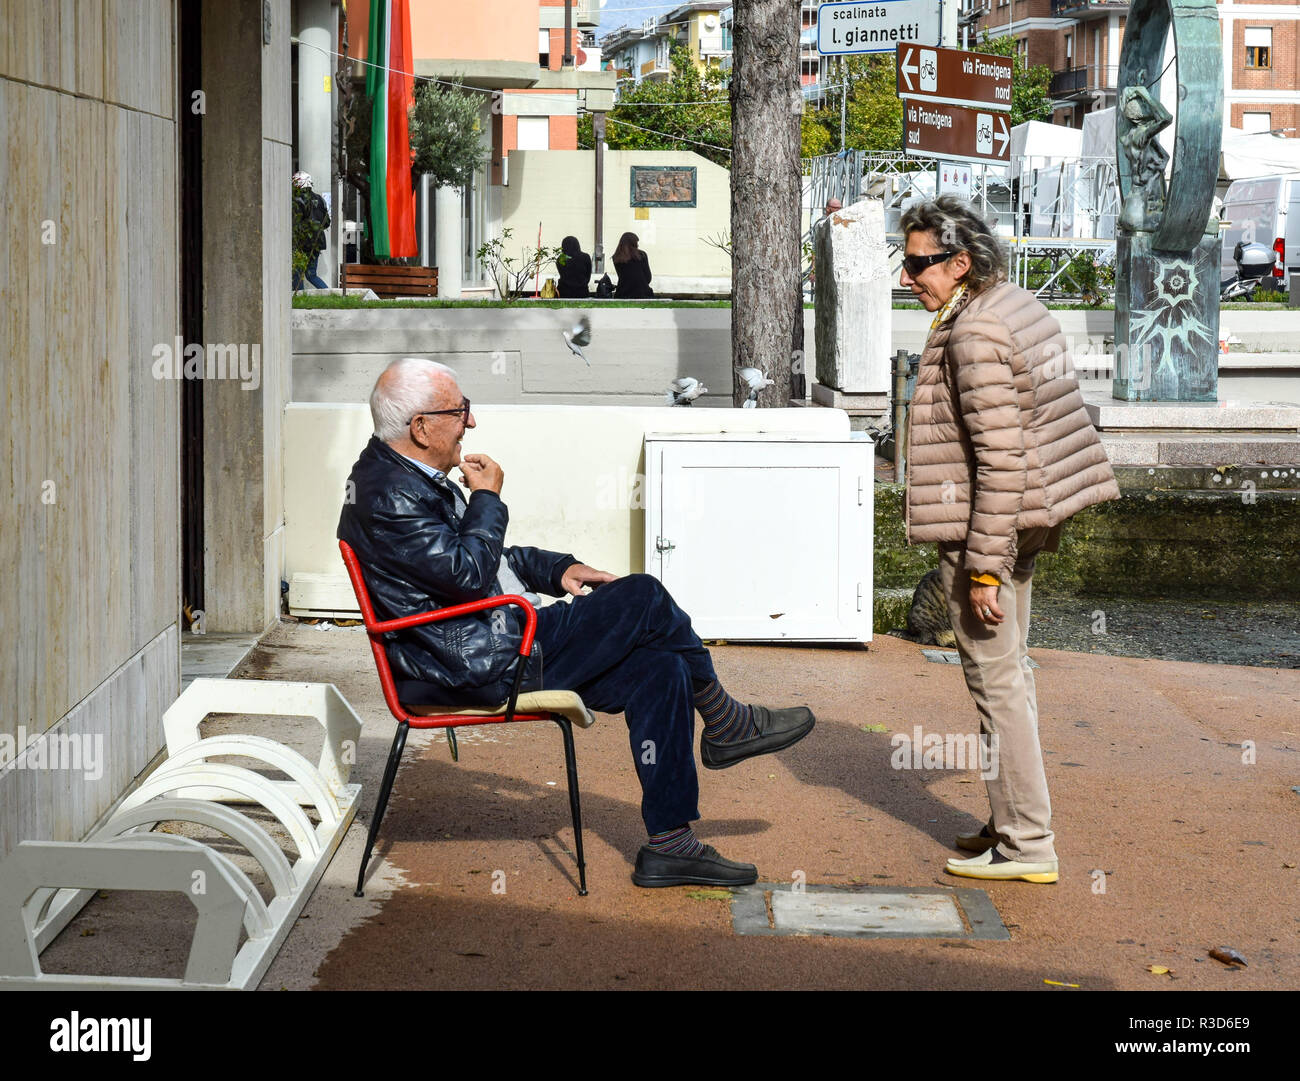 Conversation between old friends in Aulla, Tuscany. Man sits in retro-style red chair. Stock Photo